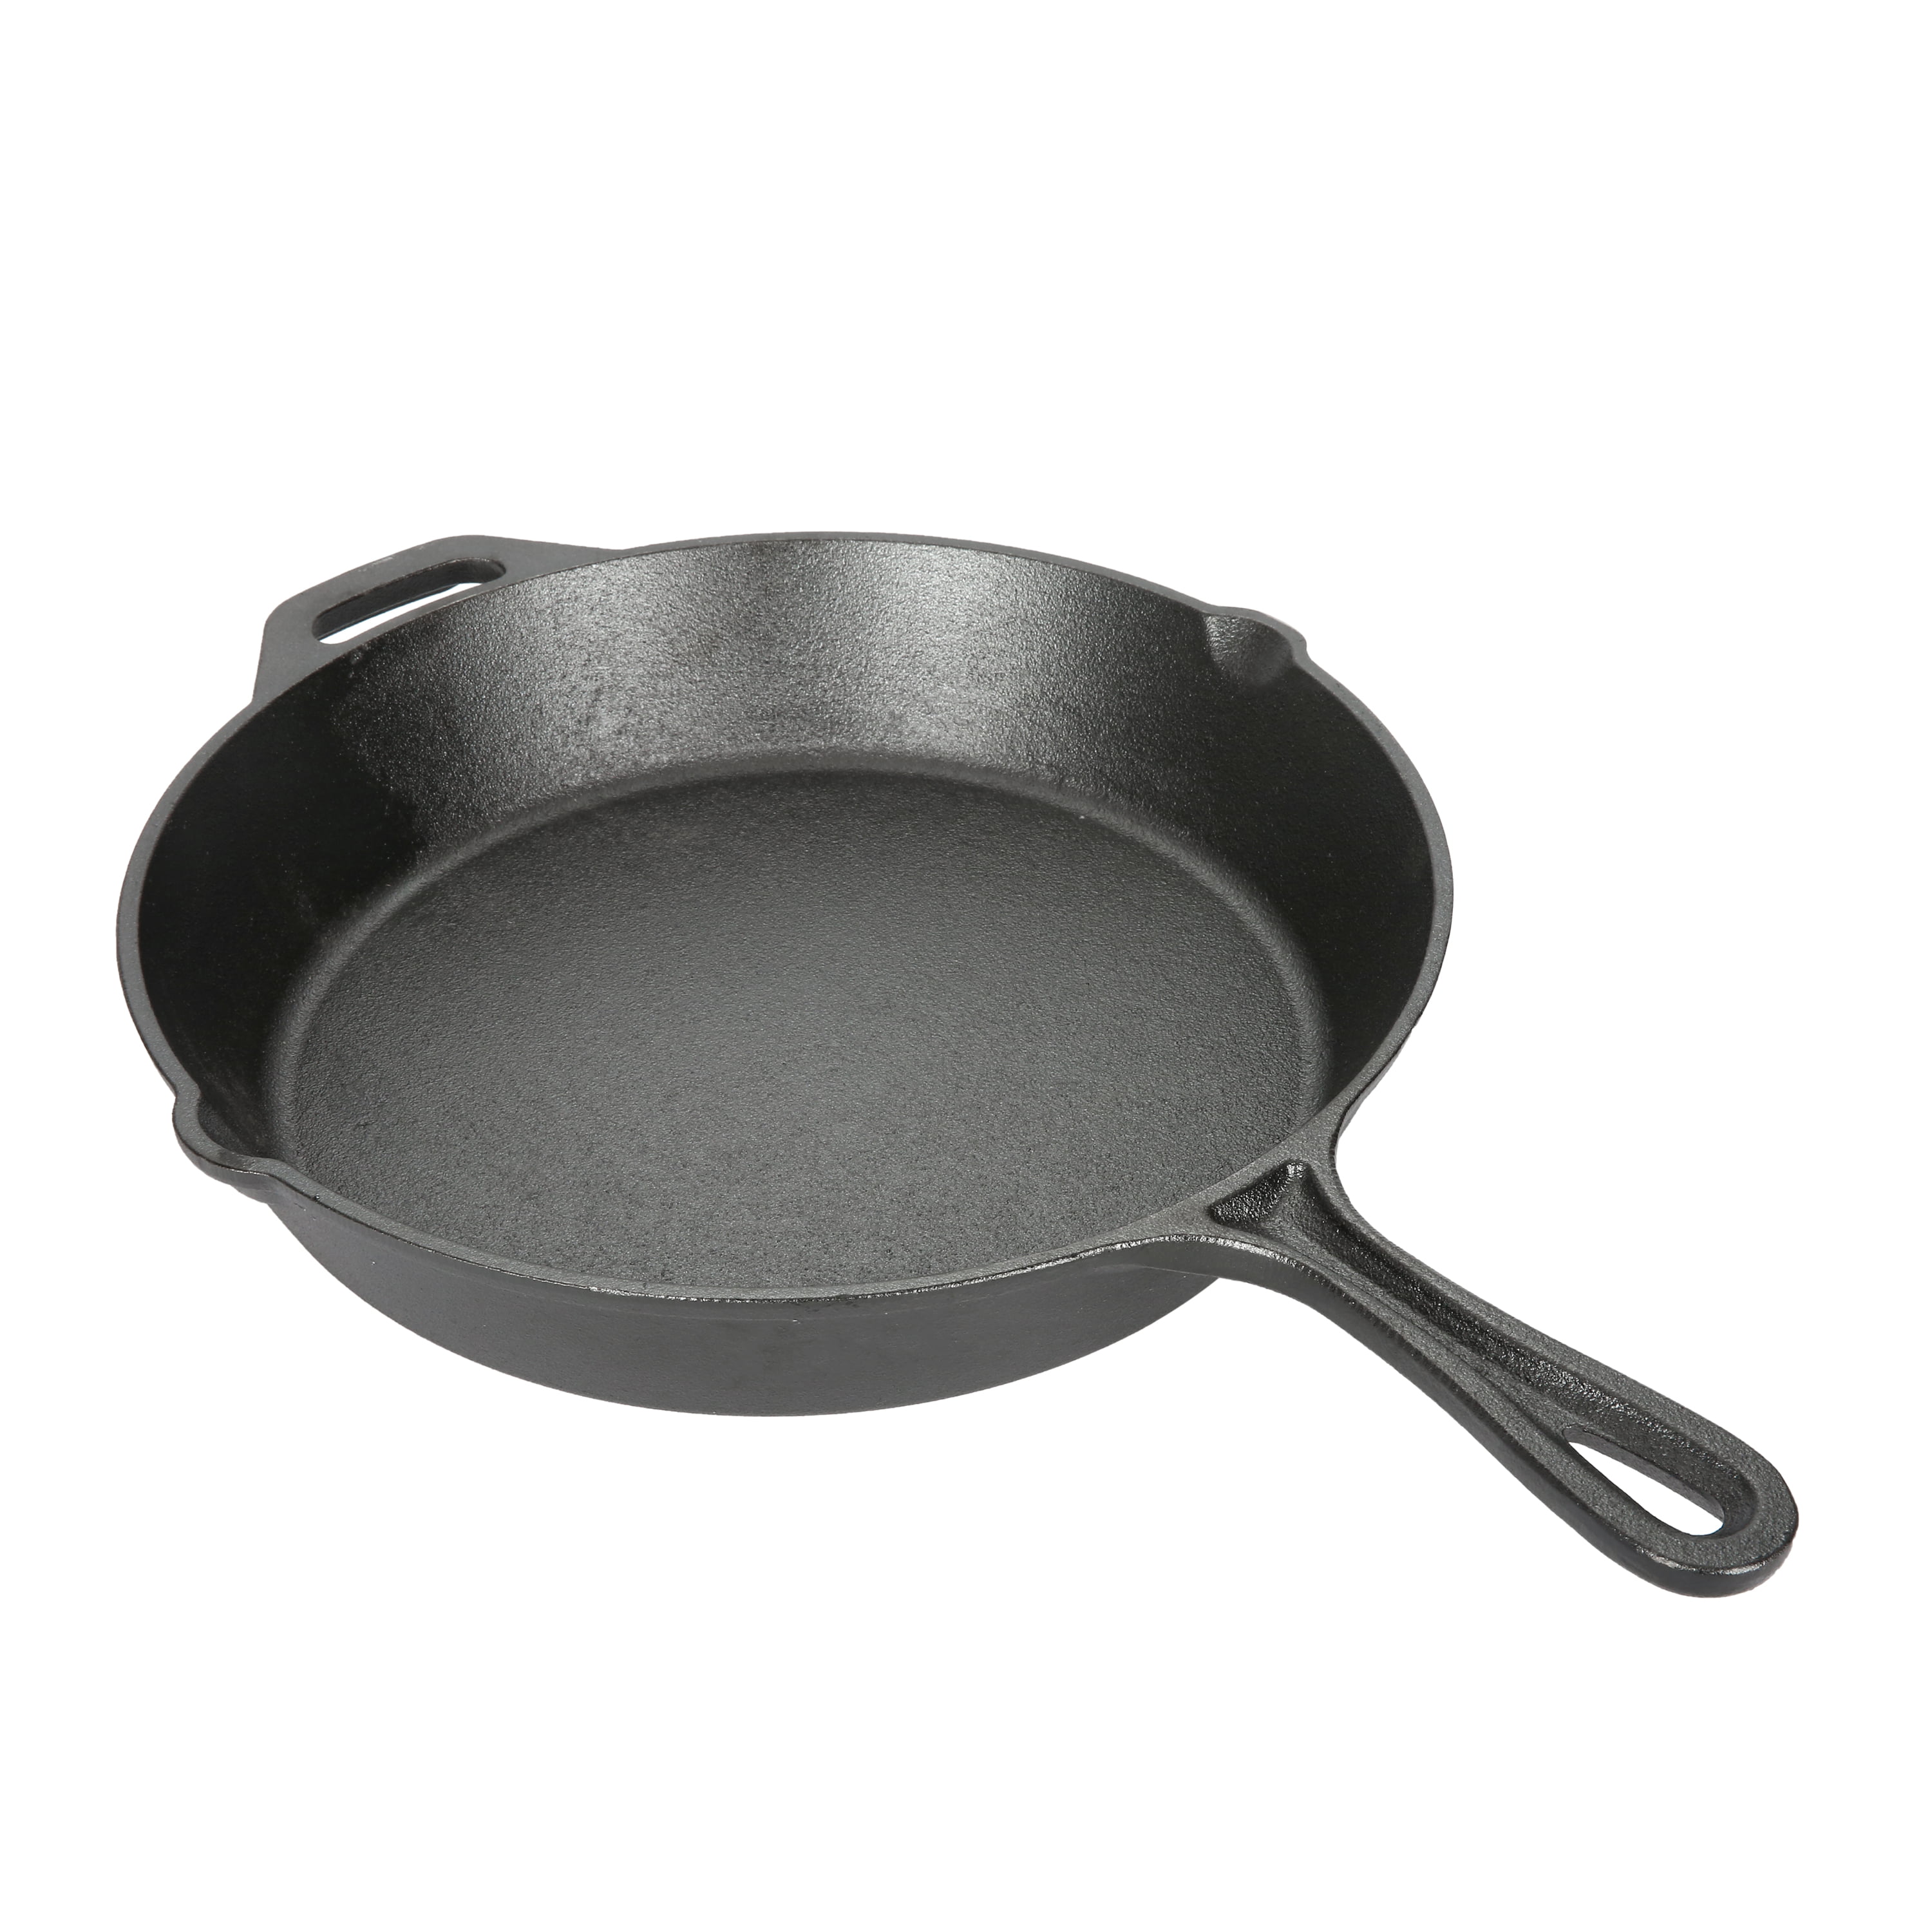 Choice 3-Piece Pre-Seasoned Cast Iron Skillet Set - Includes 8, 10 1/4,  and 12